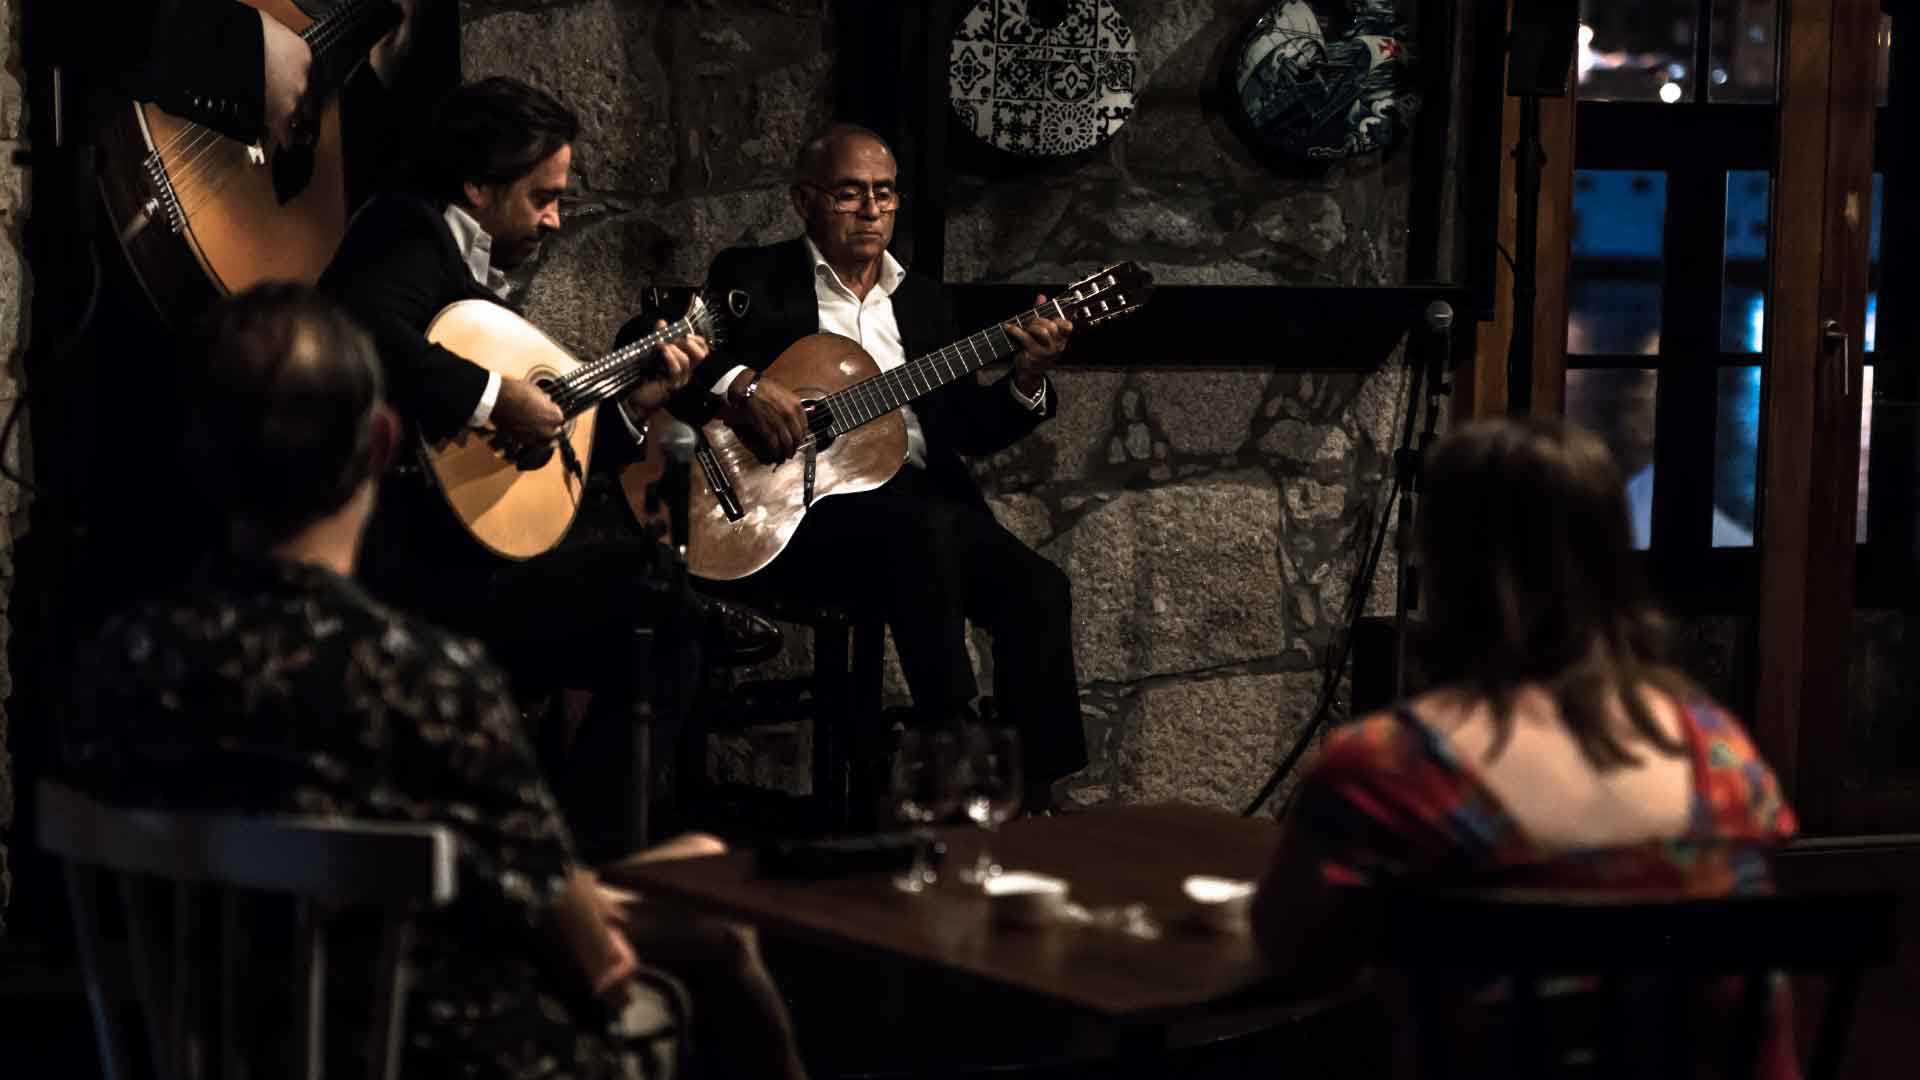 A male and a female voice, two guitars, a glass of Port Wine – you don’t need much to indulge yourself in Oporto